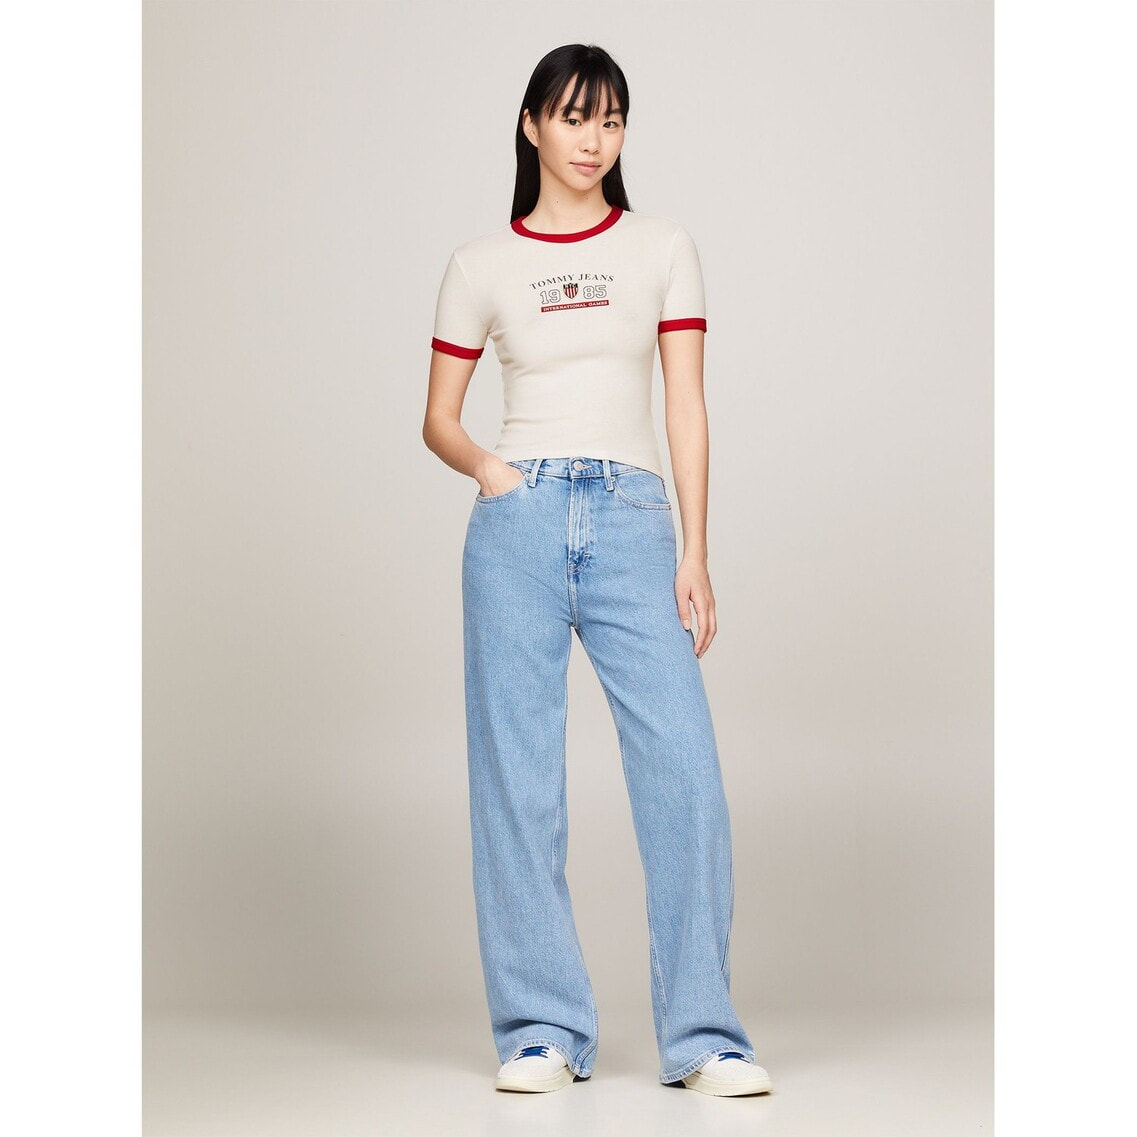 Tommy Jeans International Games リンガーTシャツ | TOMMY HILFIGER 